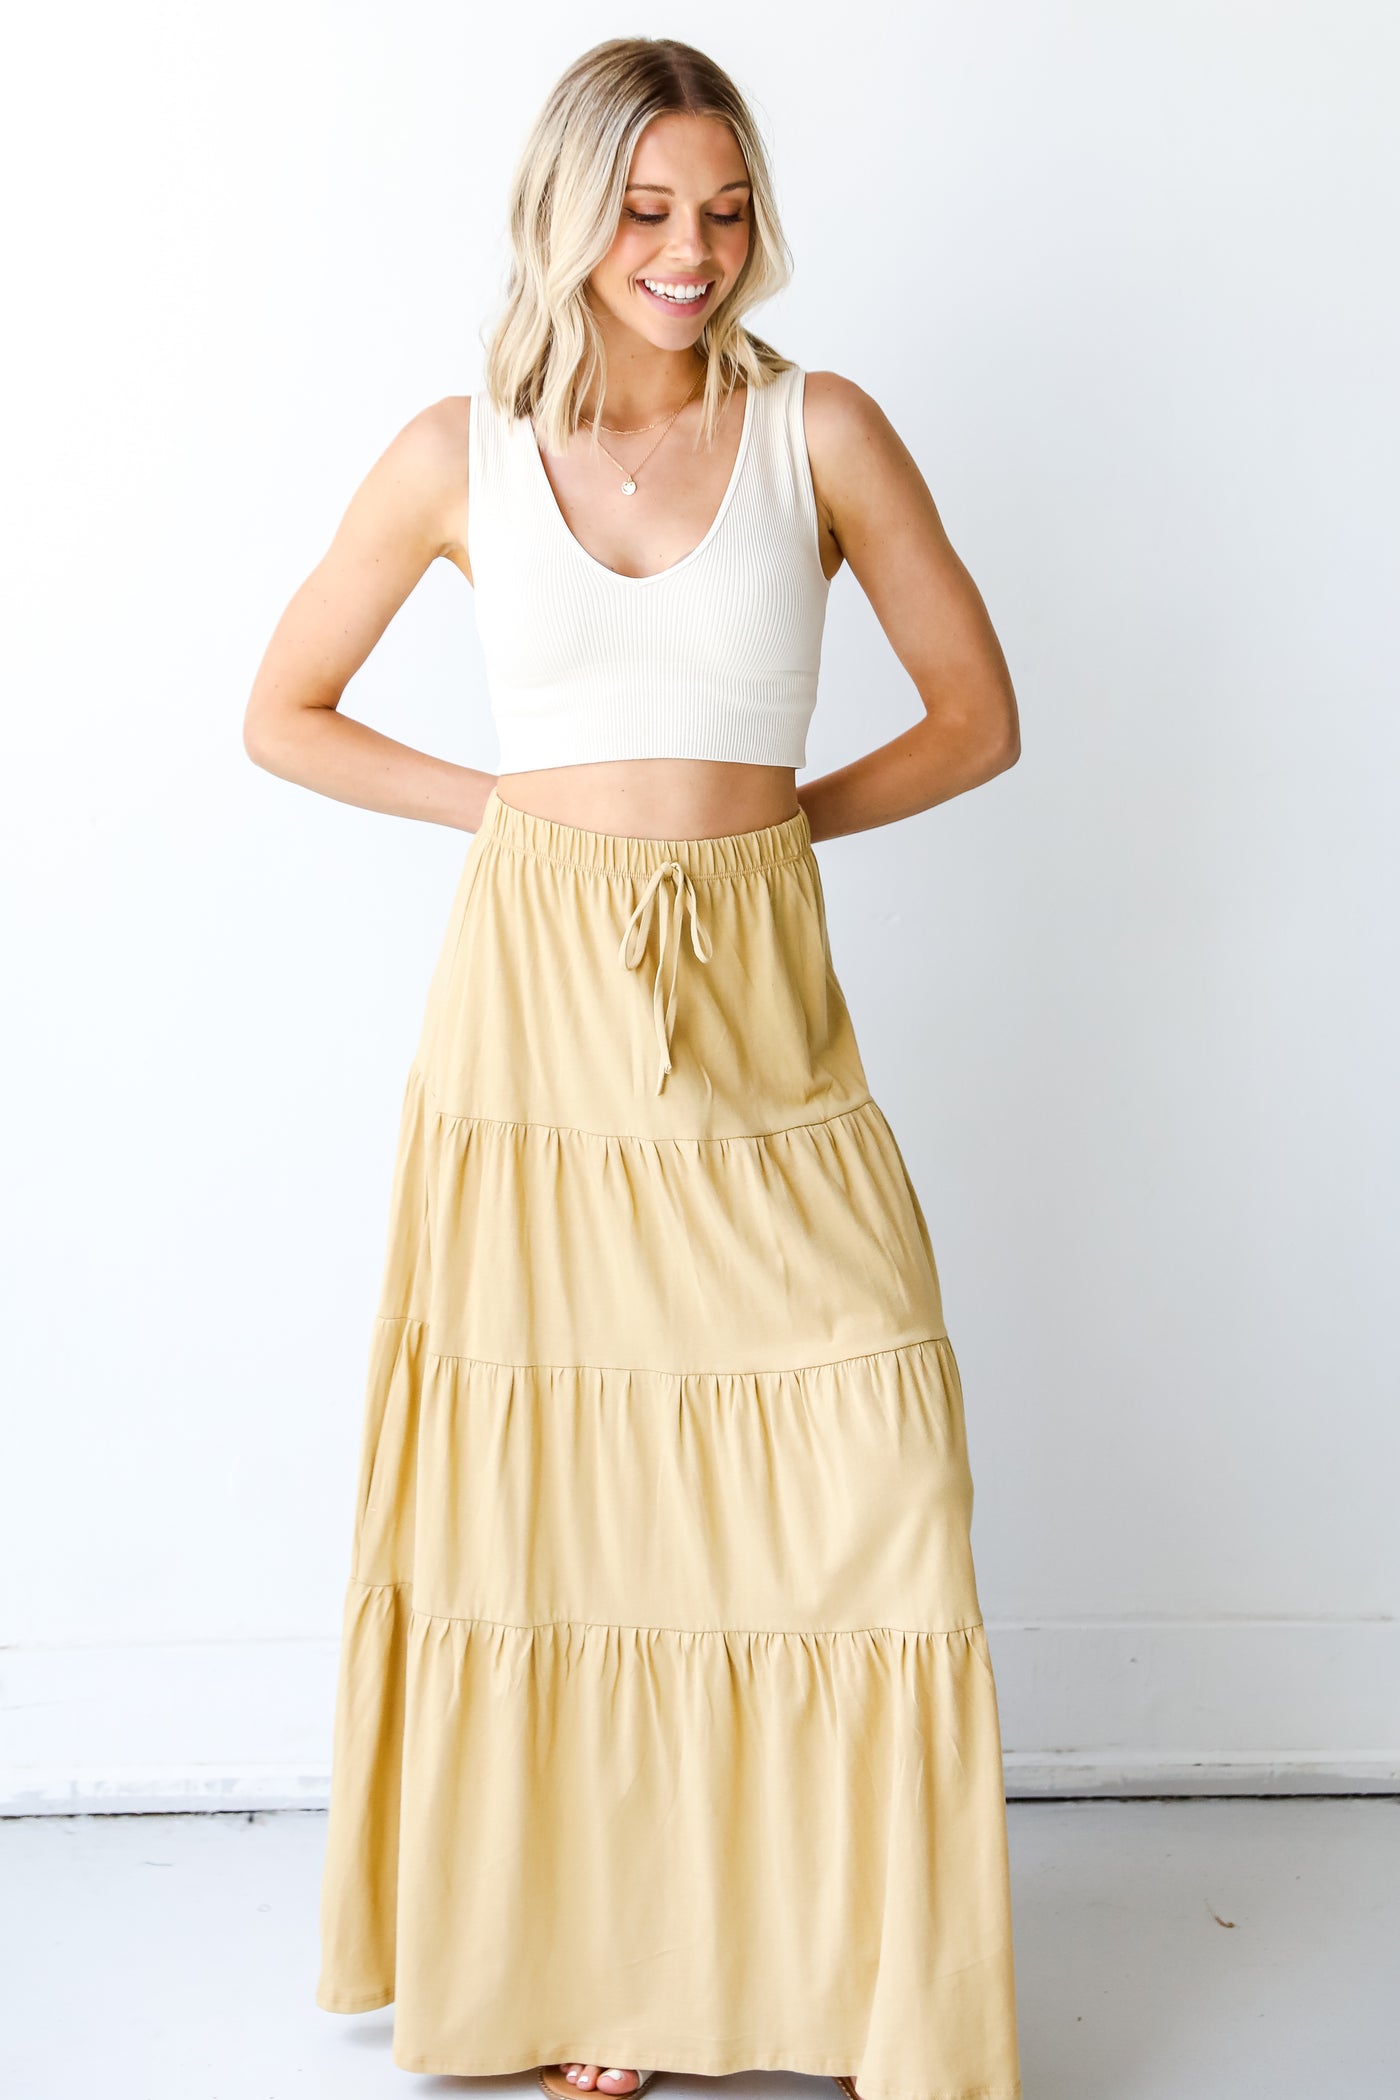 Tiered Maxi Skirt in yellow on model